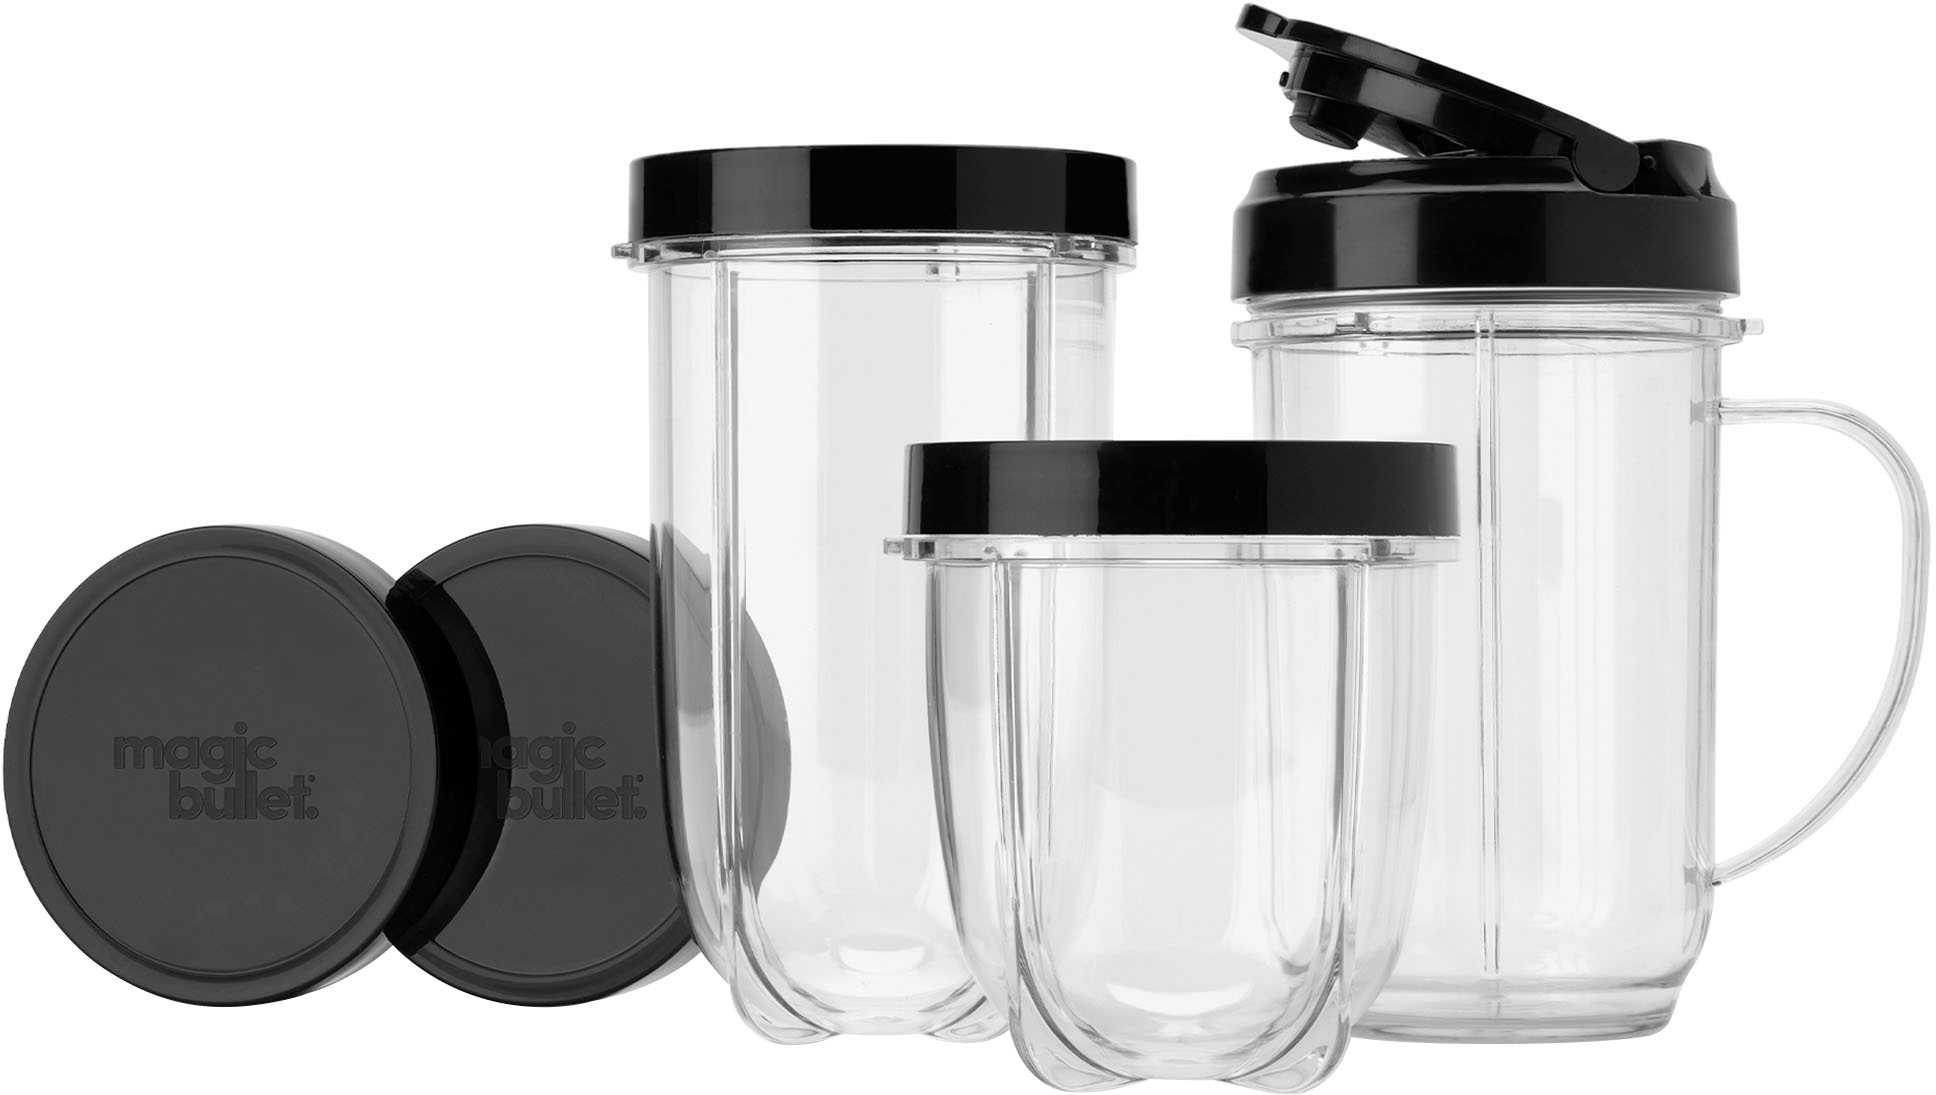 Magic Bullet's wireless blender and tumbler combo drops 40% to $24